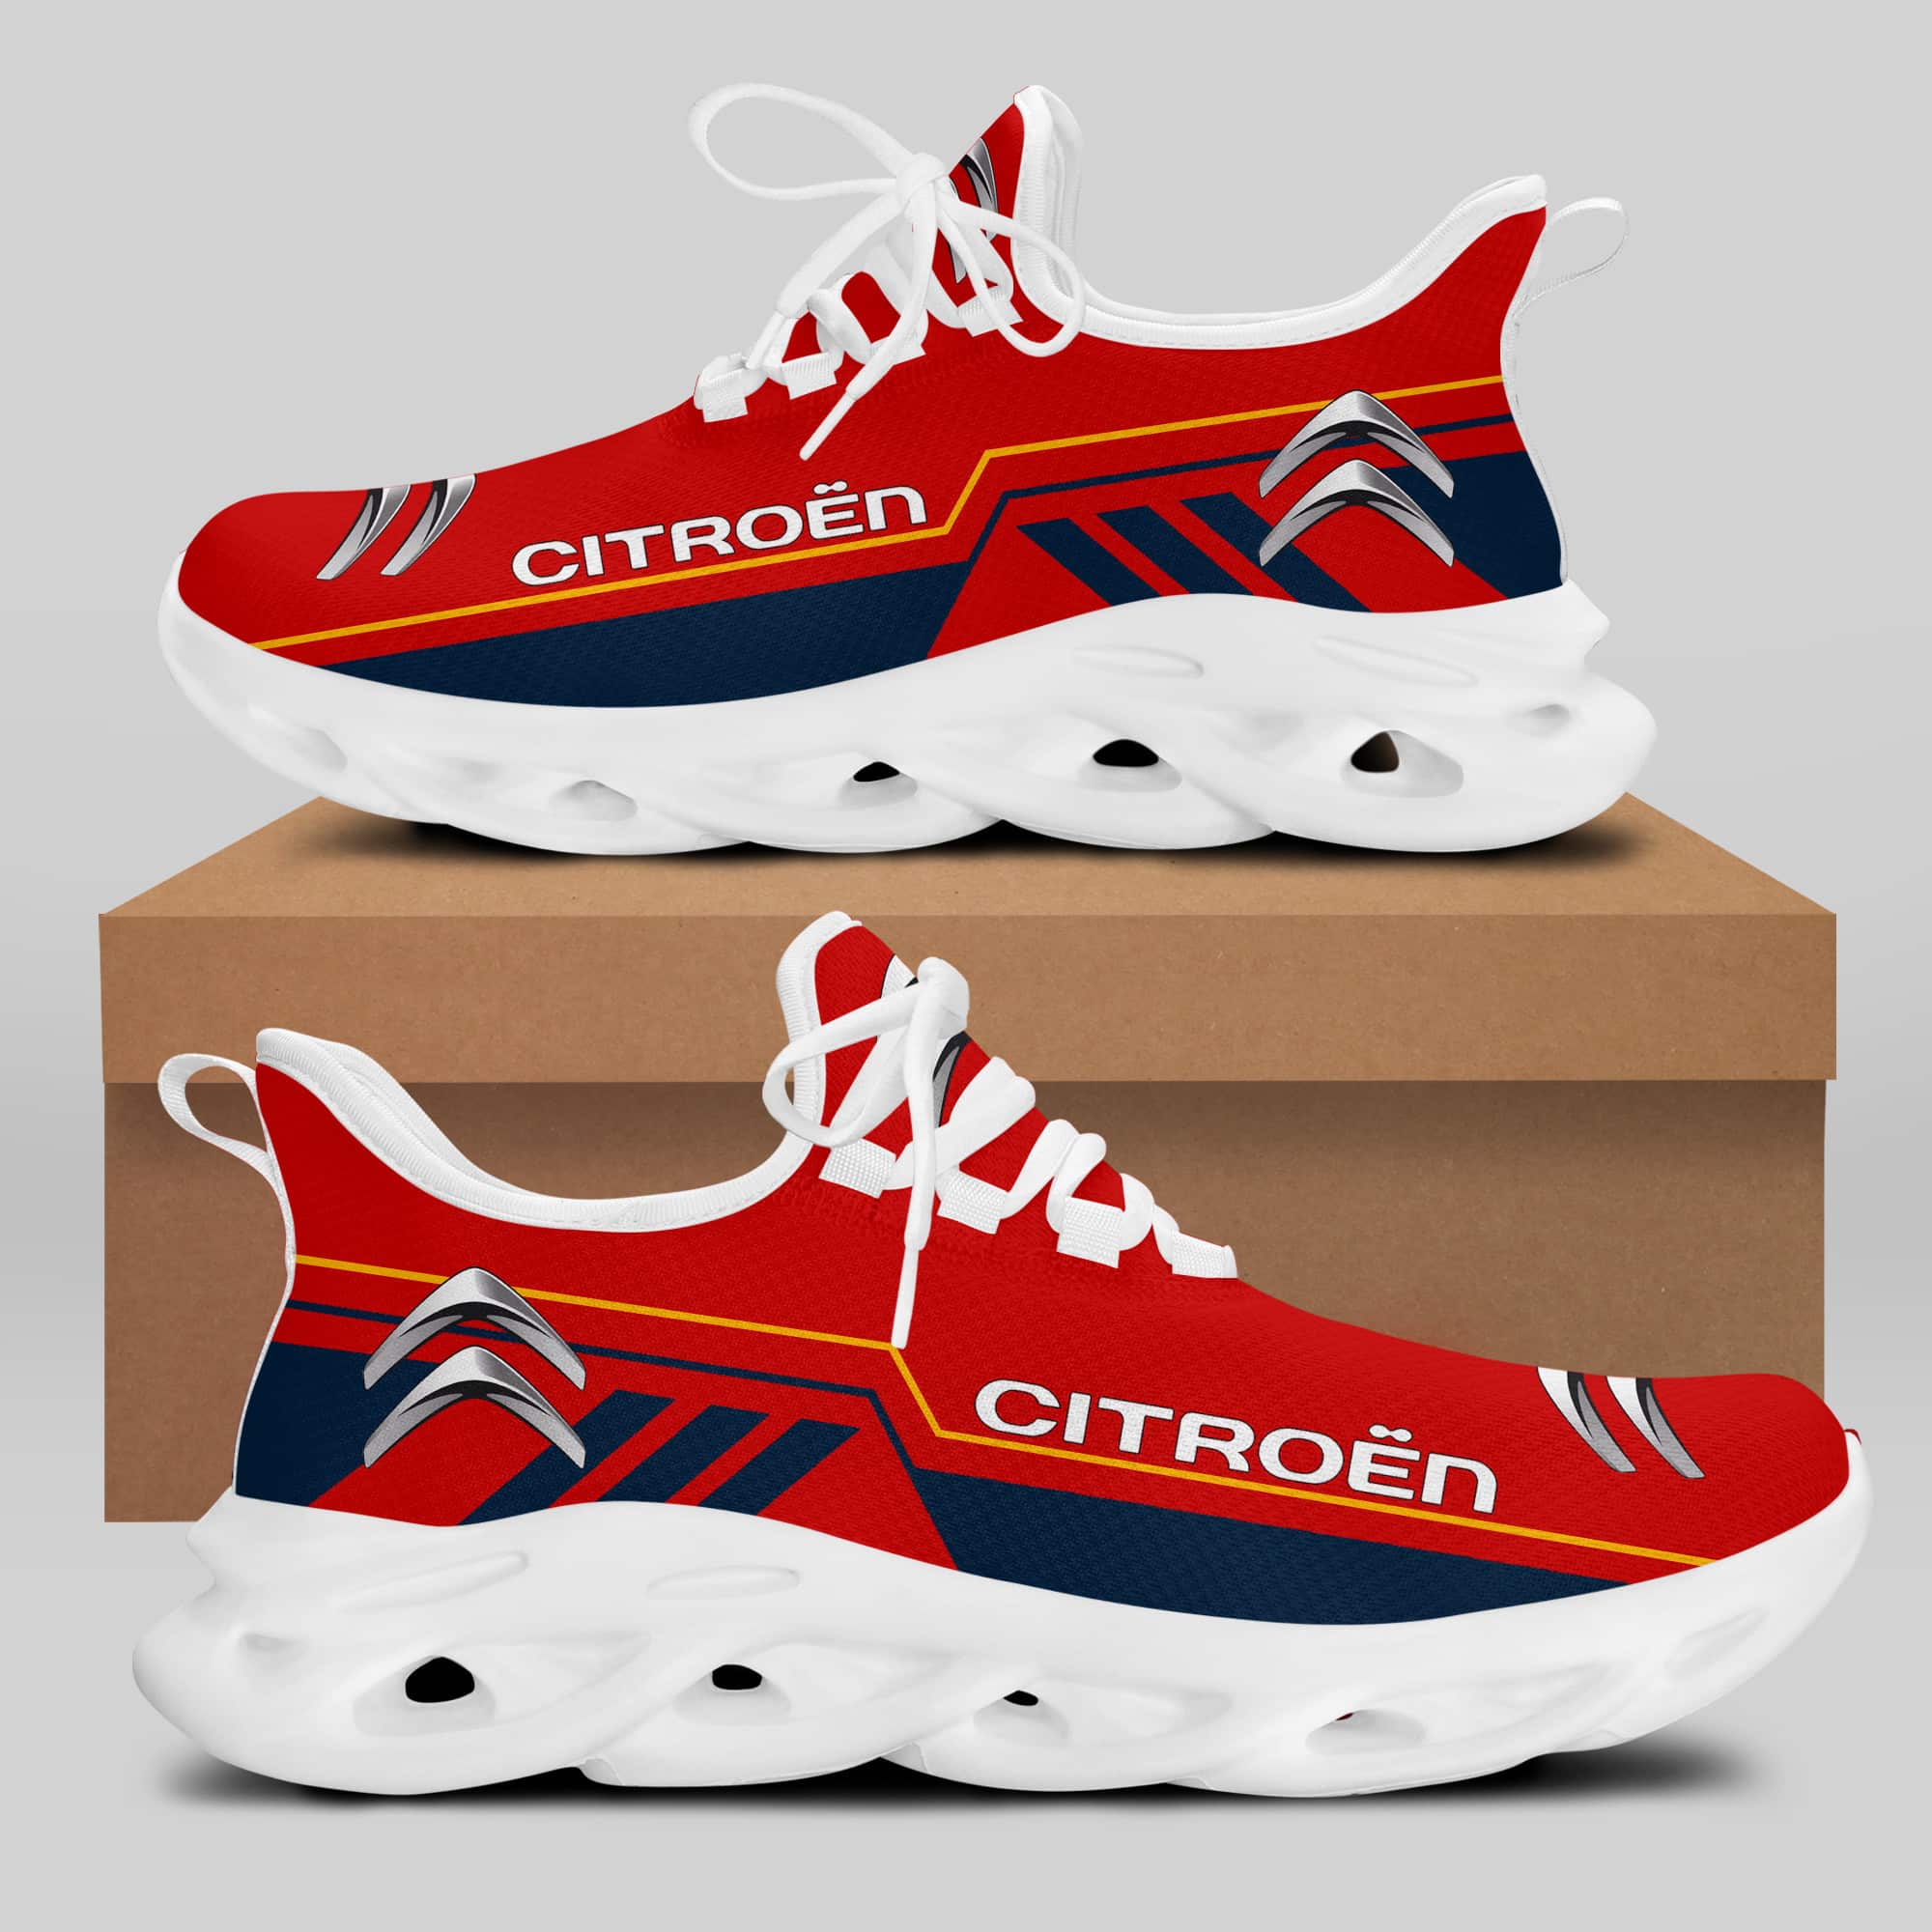 Citroën Running Shoes Max Soul Shoes Sneakers Ver 10 2